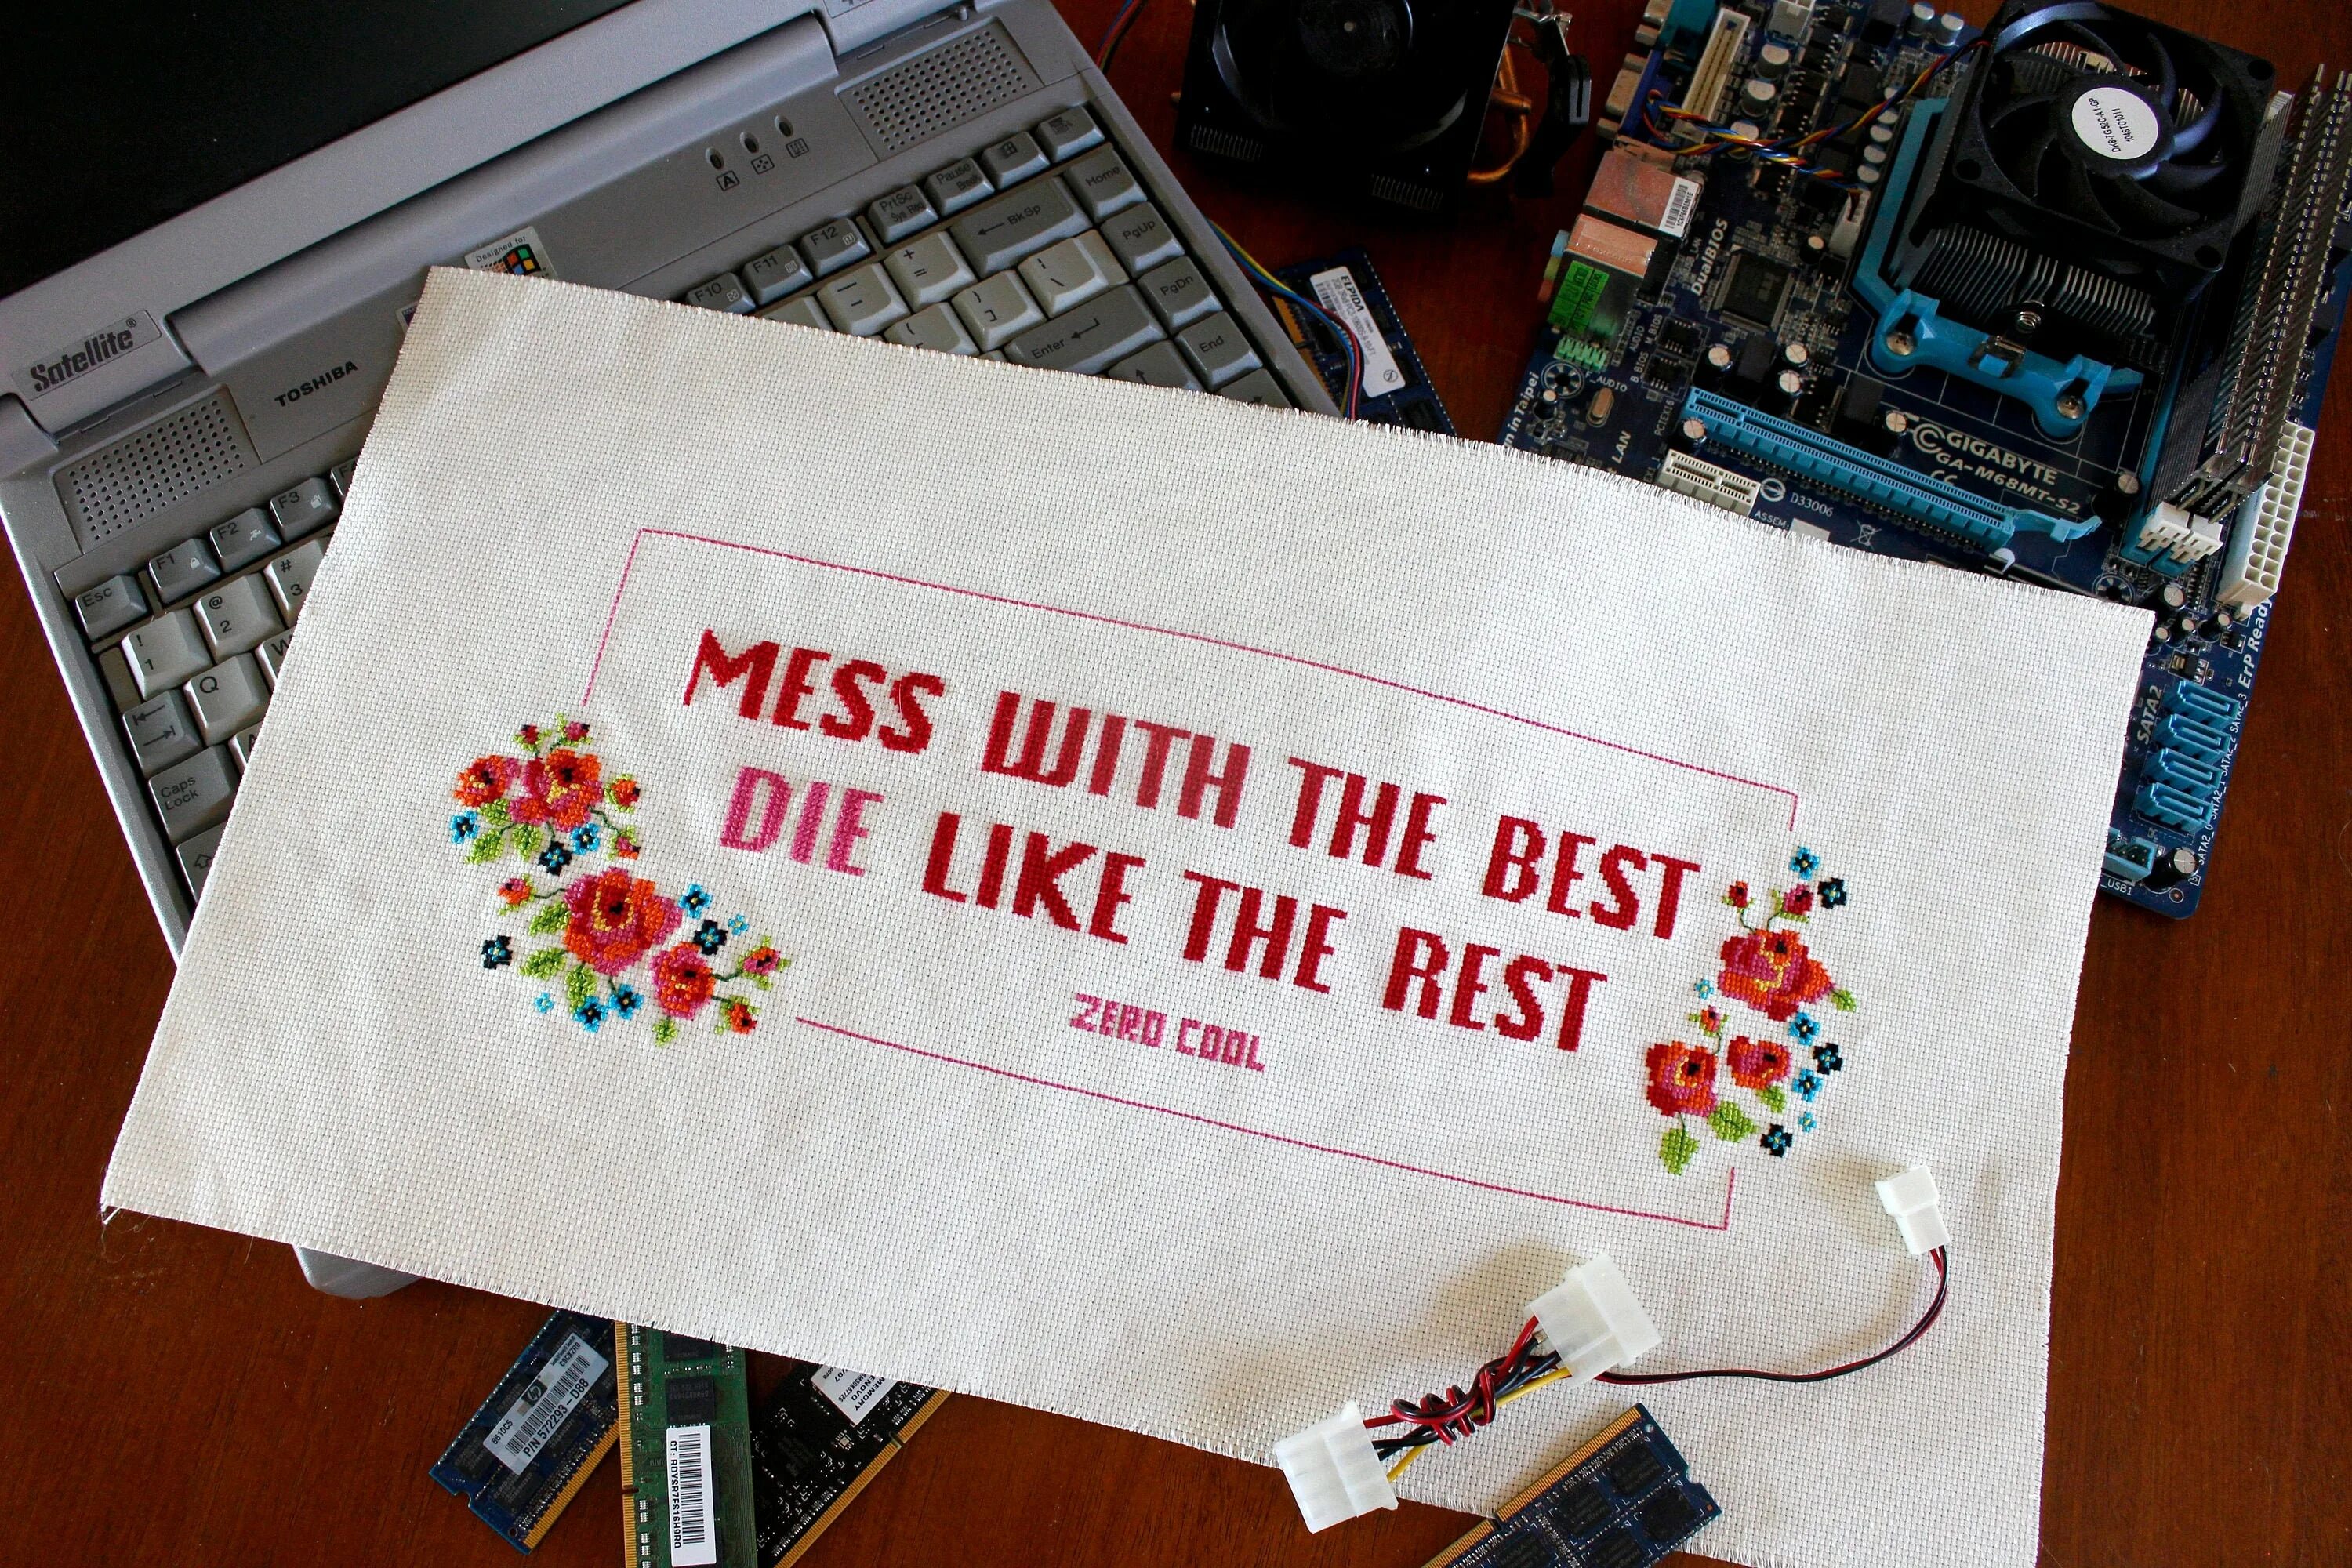 I well die. Mess with the best die like the rest. Футболка mess with the best die like the rest. Mess with the best - die like the rest! Echo5538. Hackers movie quotes.